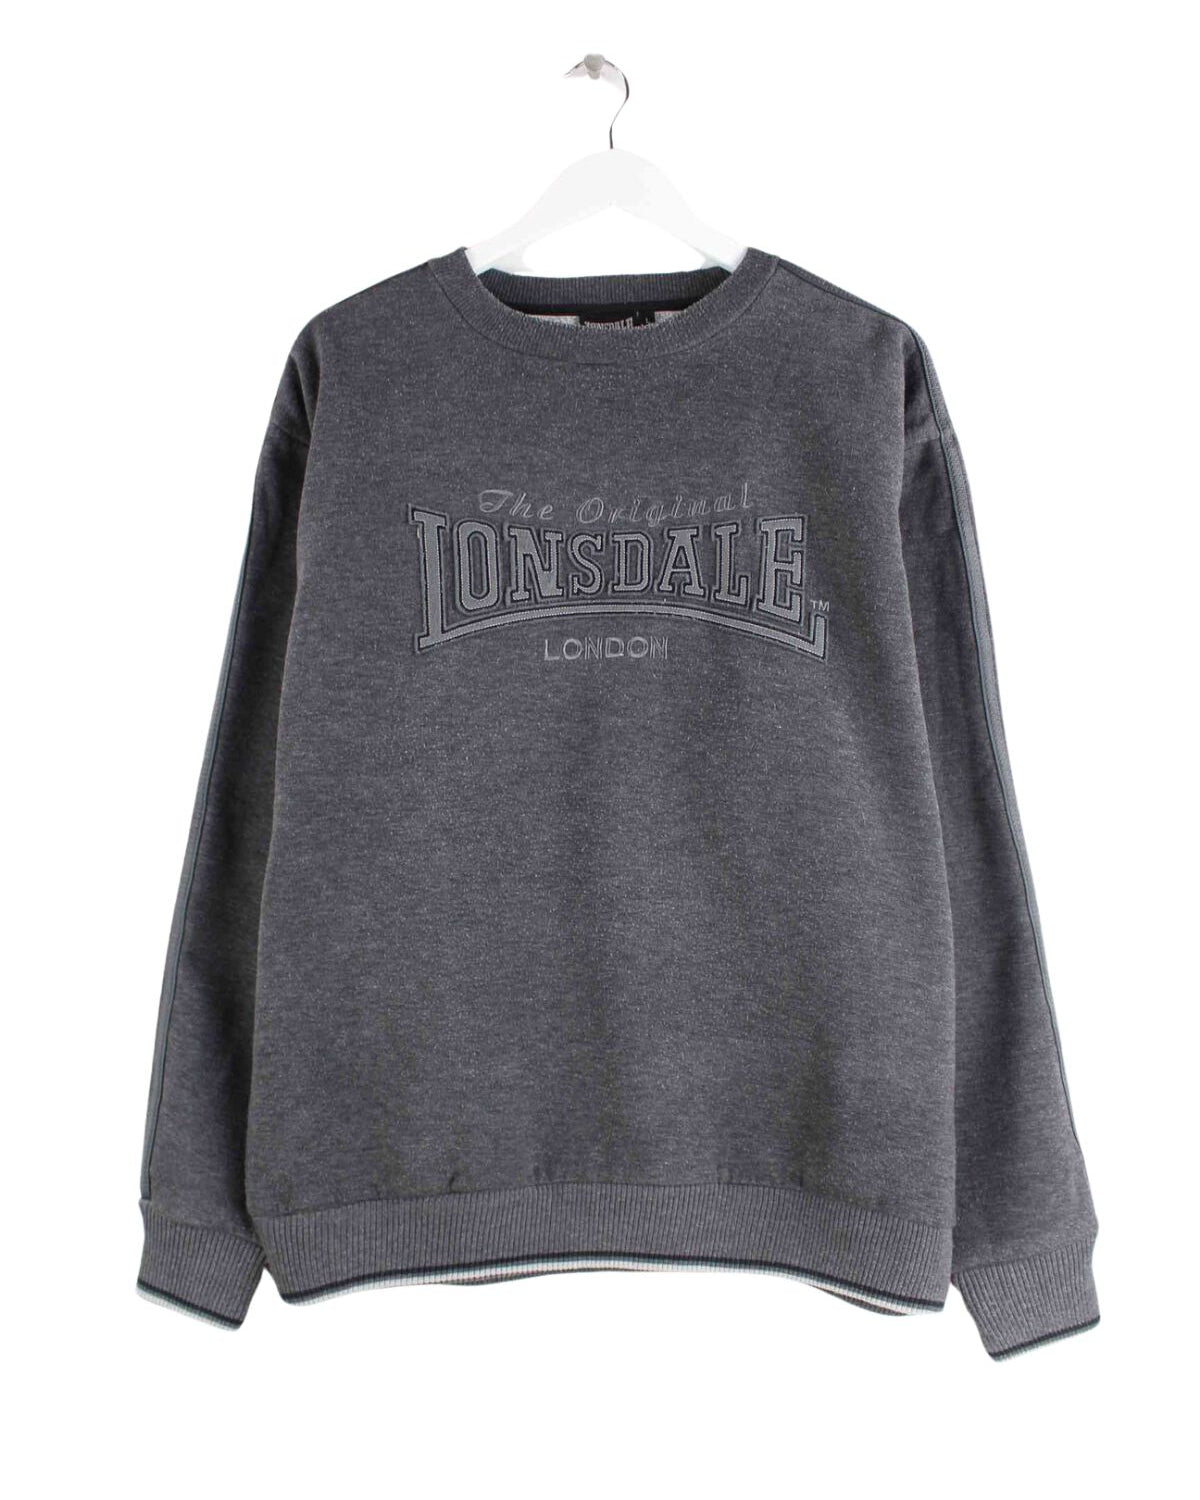 Lonsdale y2k Embroidered Sweater Grau L (front image)